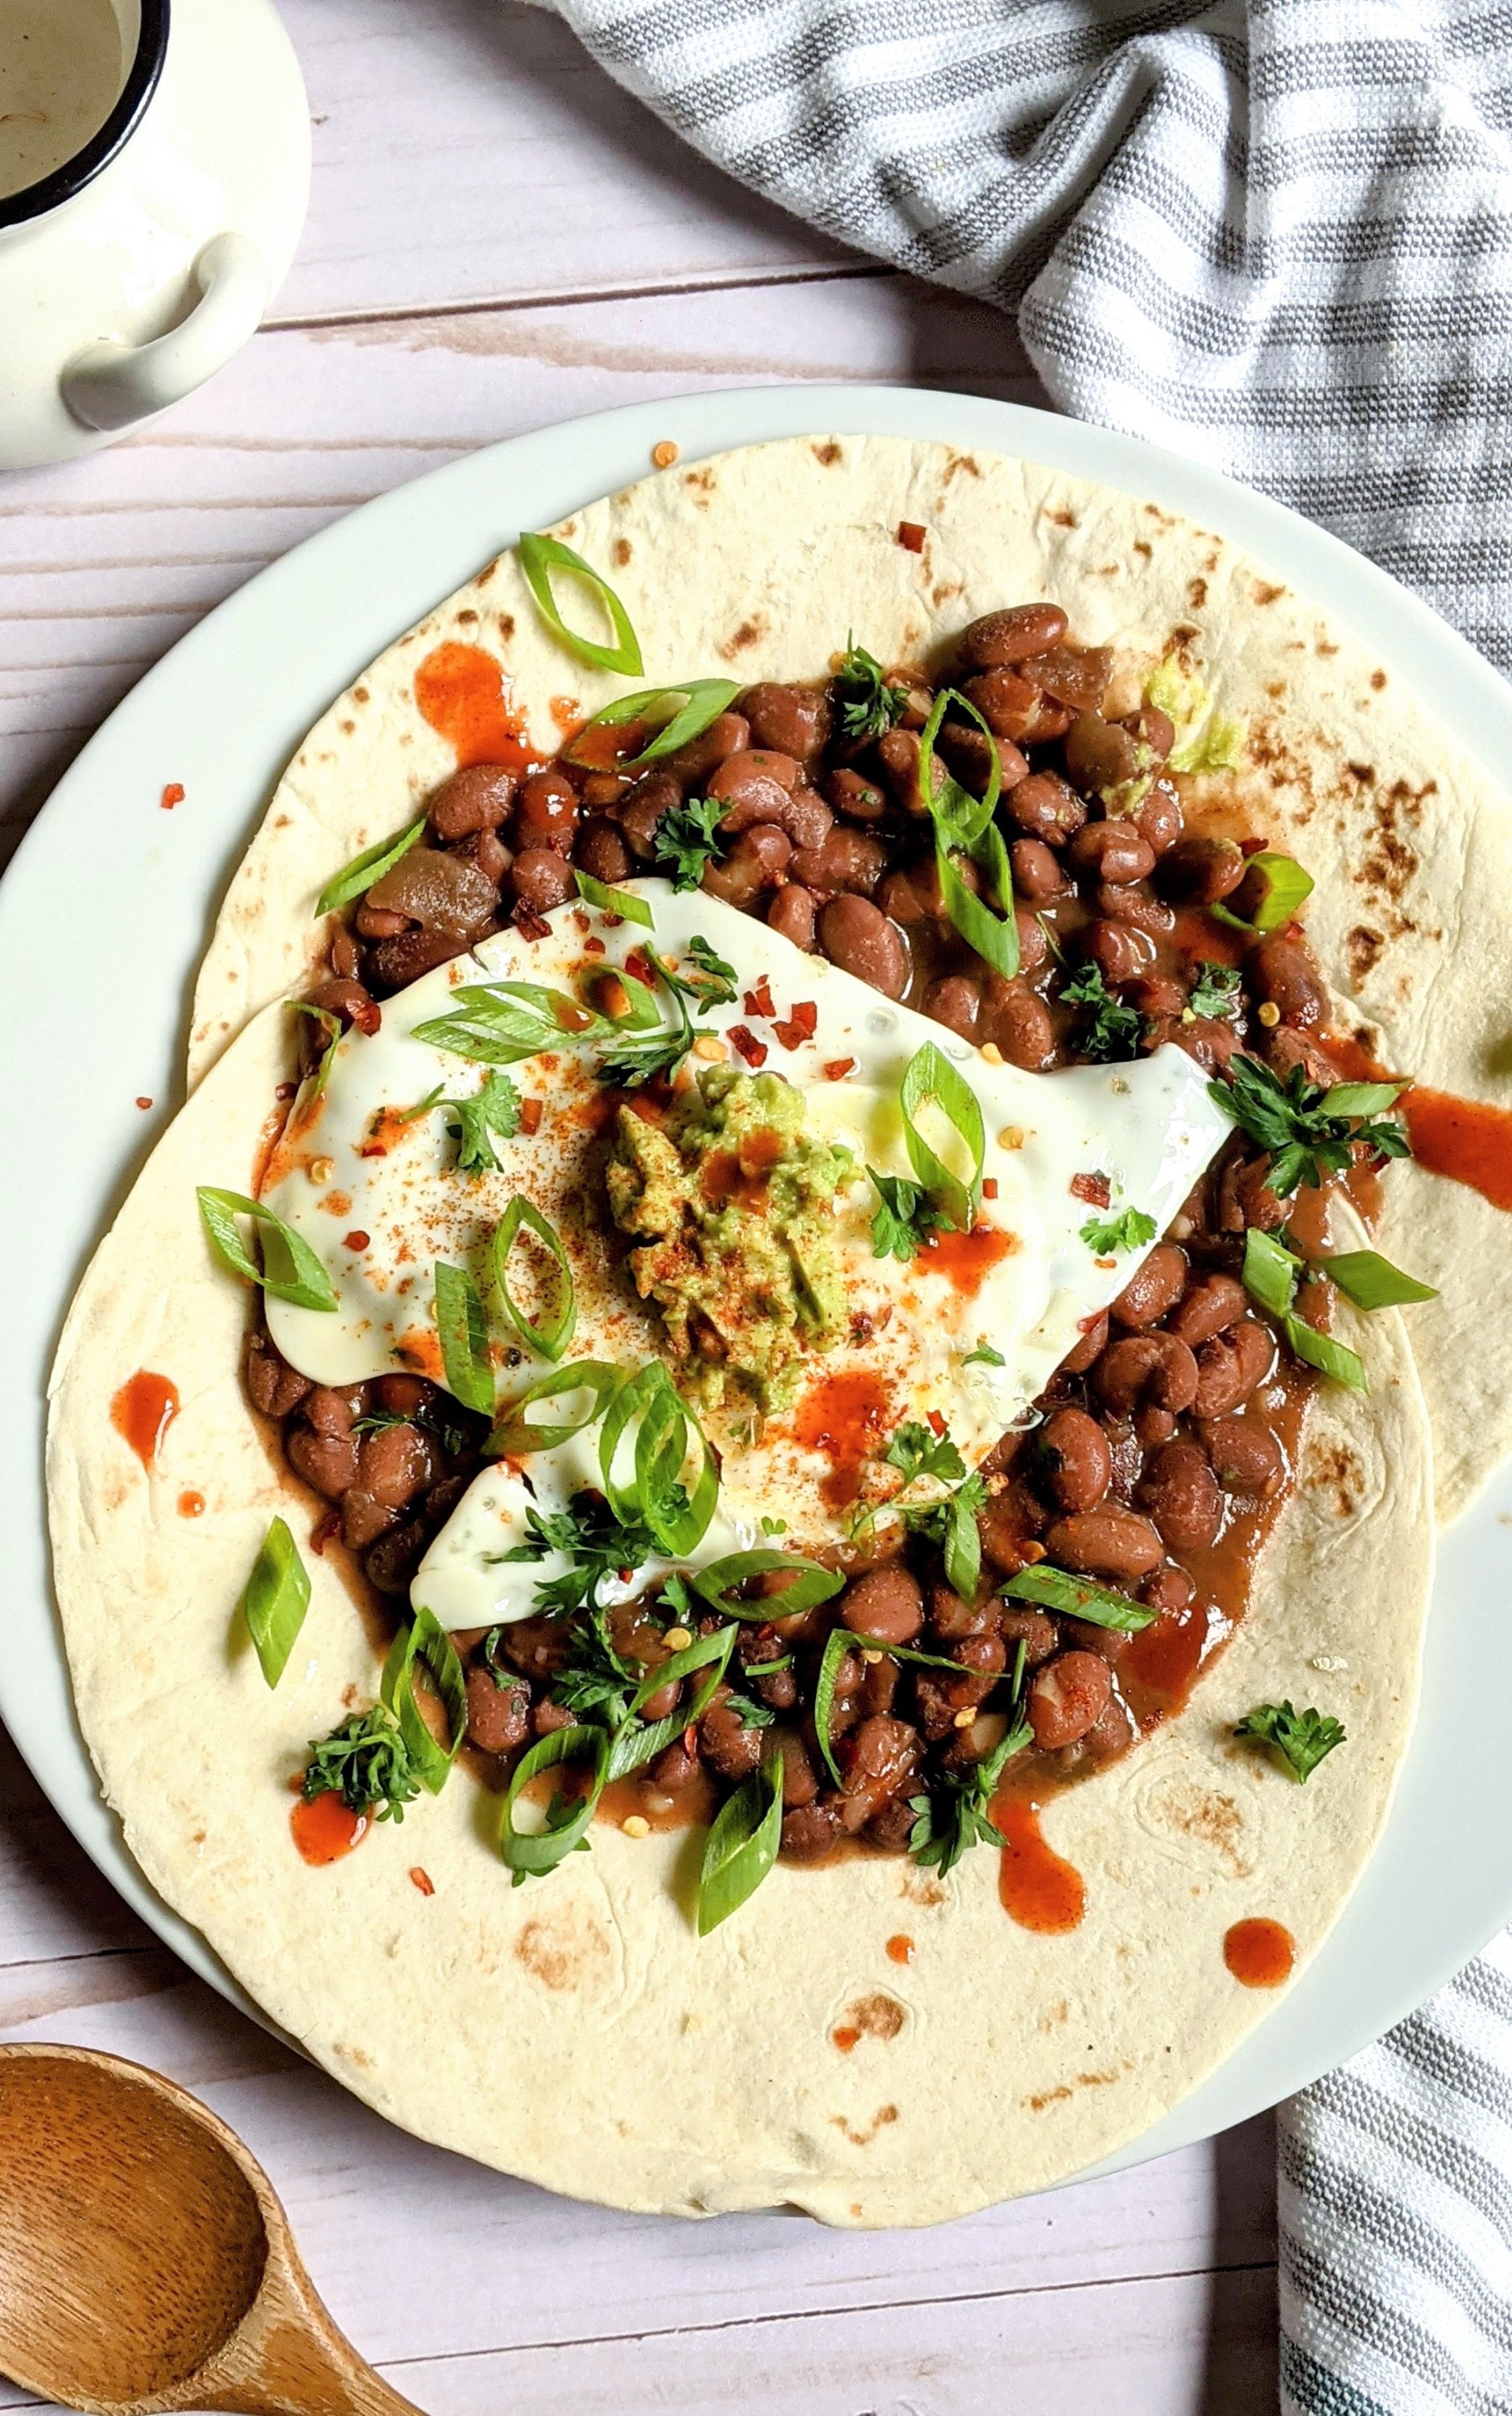 vegetarian gluten free breakfast recipe american huevos rancheros with pinto beans and corn tortillas gluten free brunches with eggs and spicy beans healthy mexican brunch recipes 